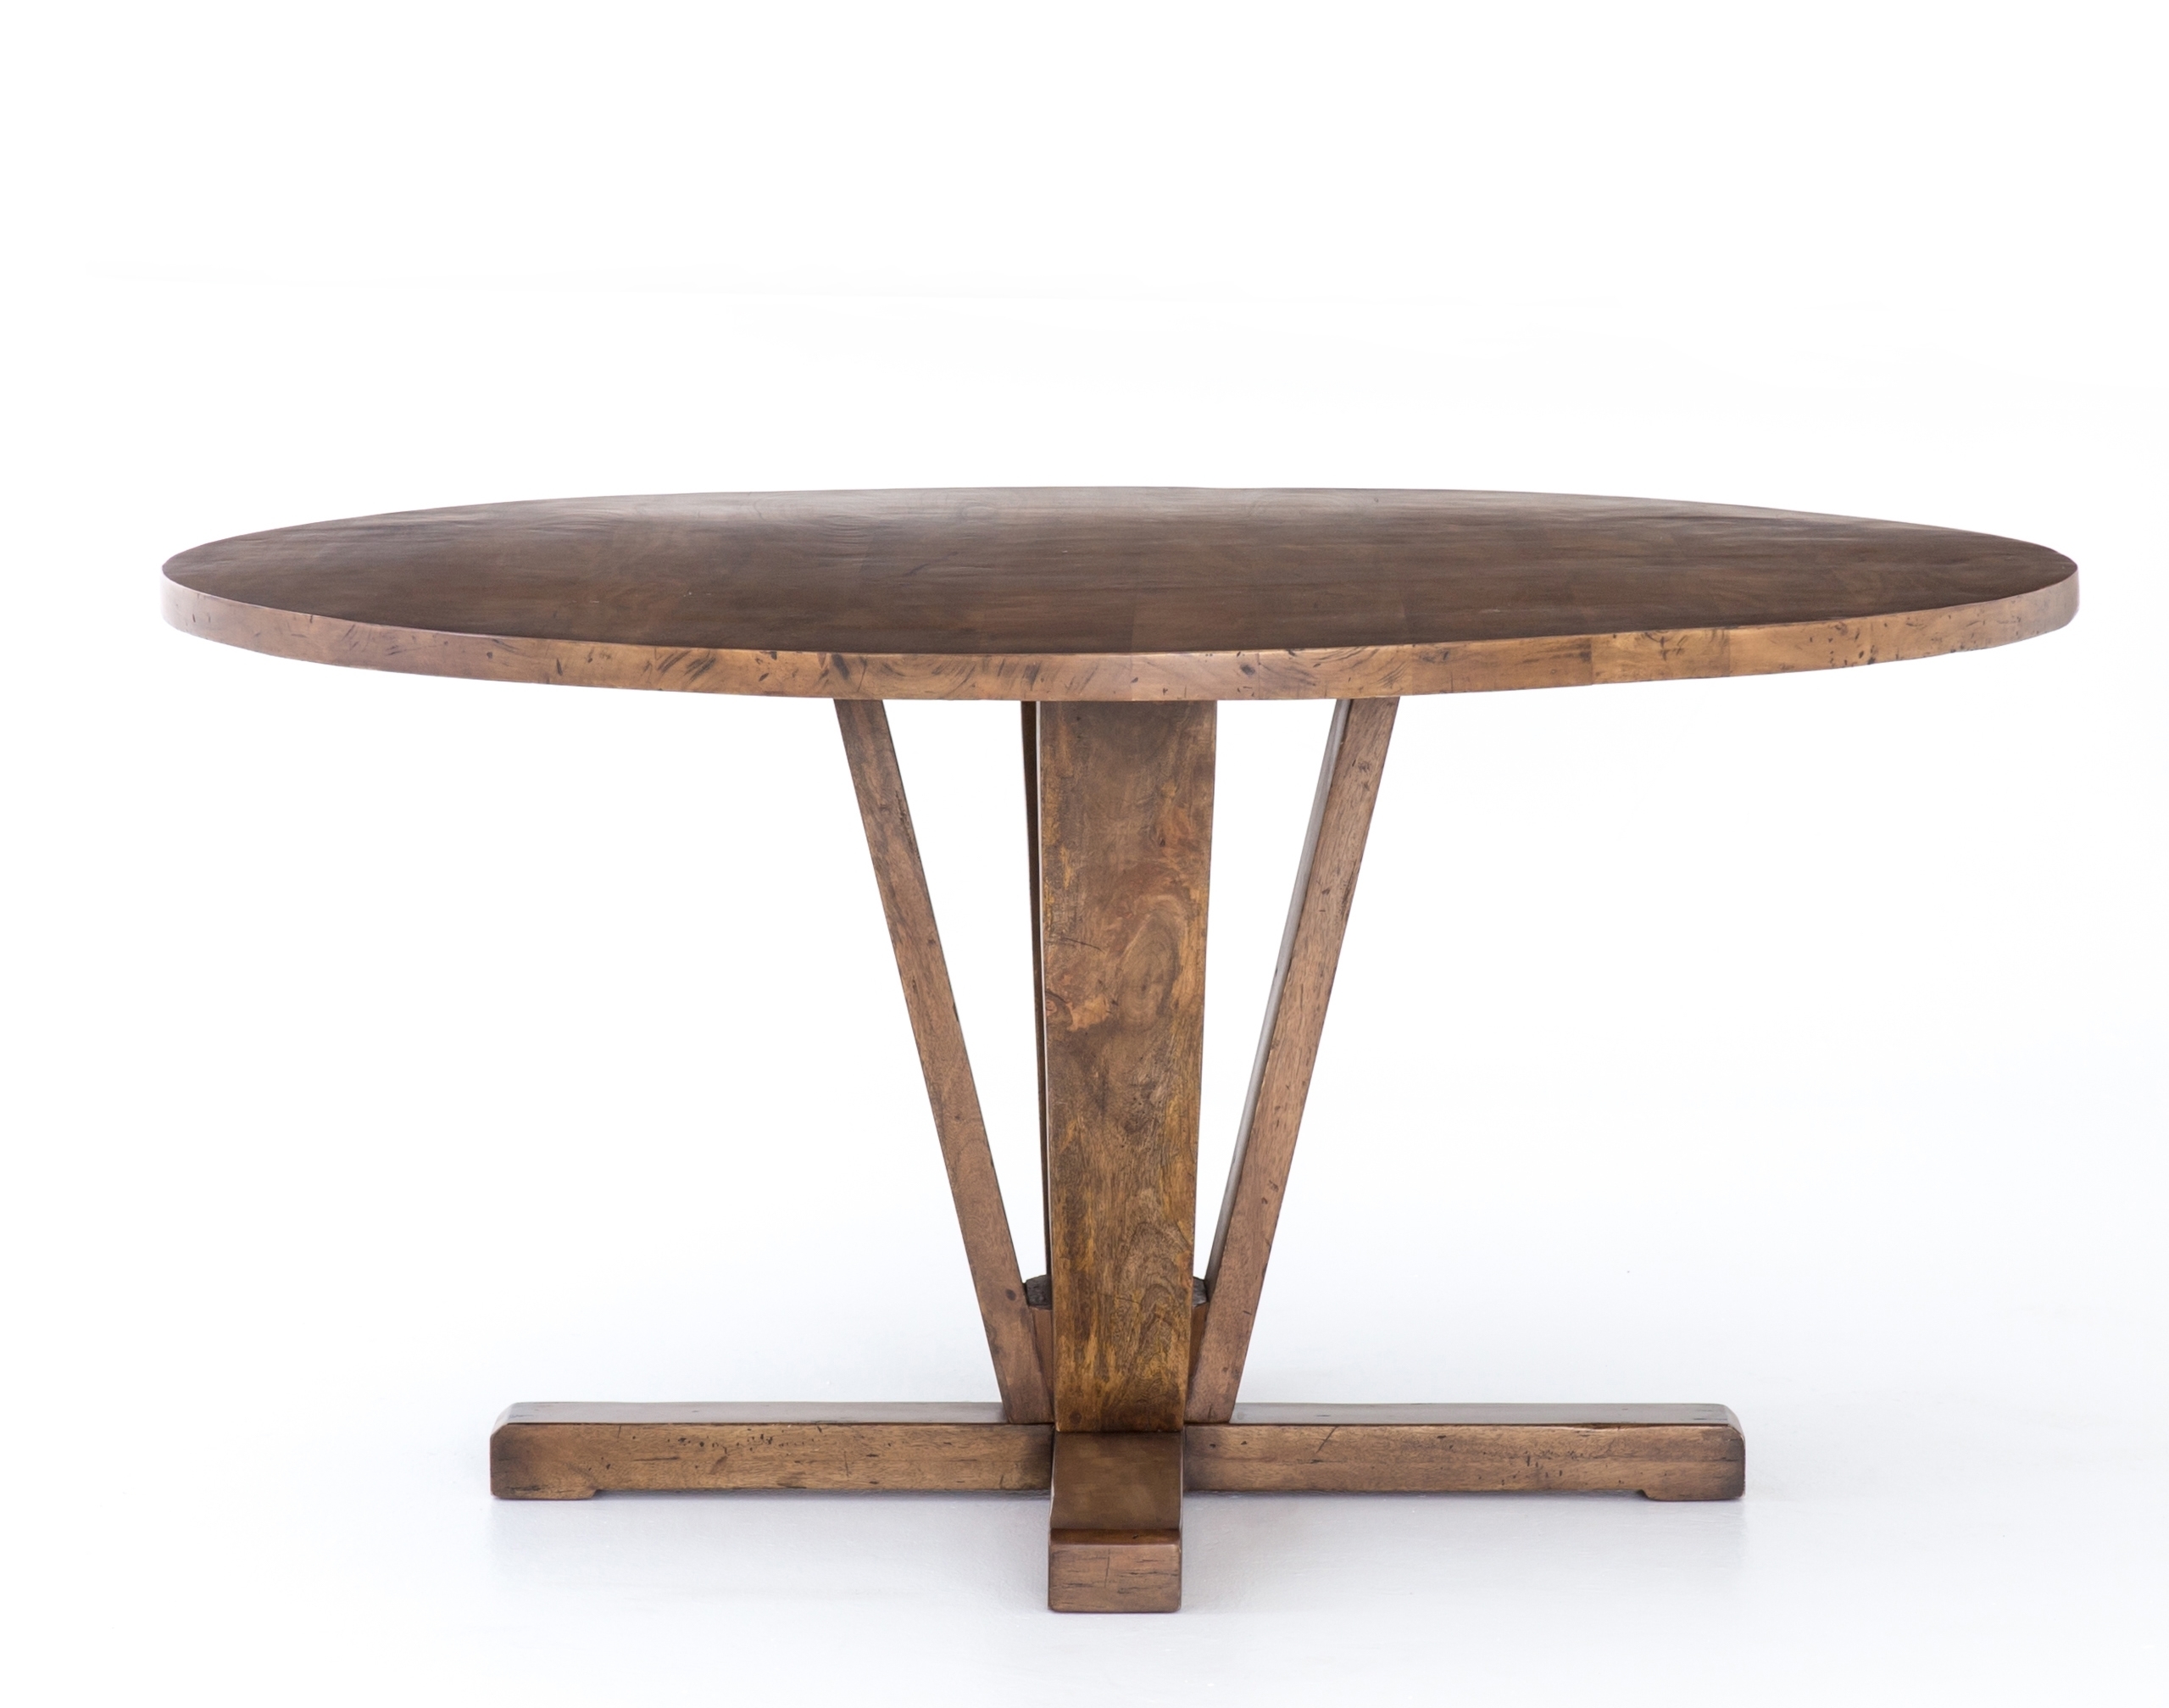 Maleva Round Dining Table, Reclaimed Wood - Image 2